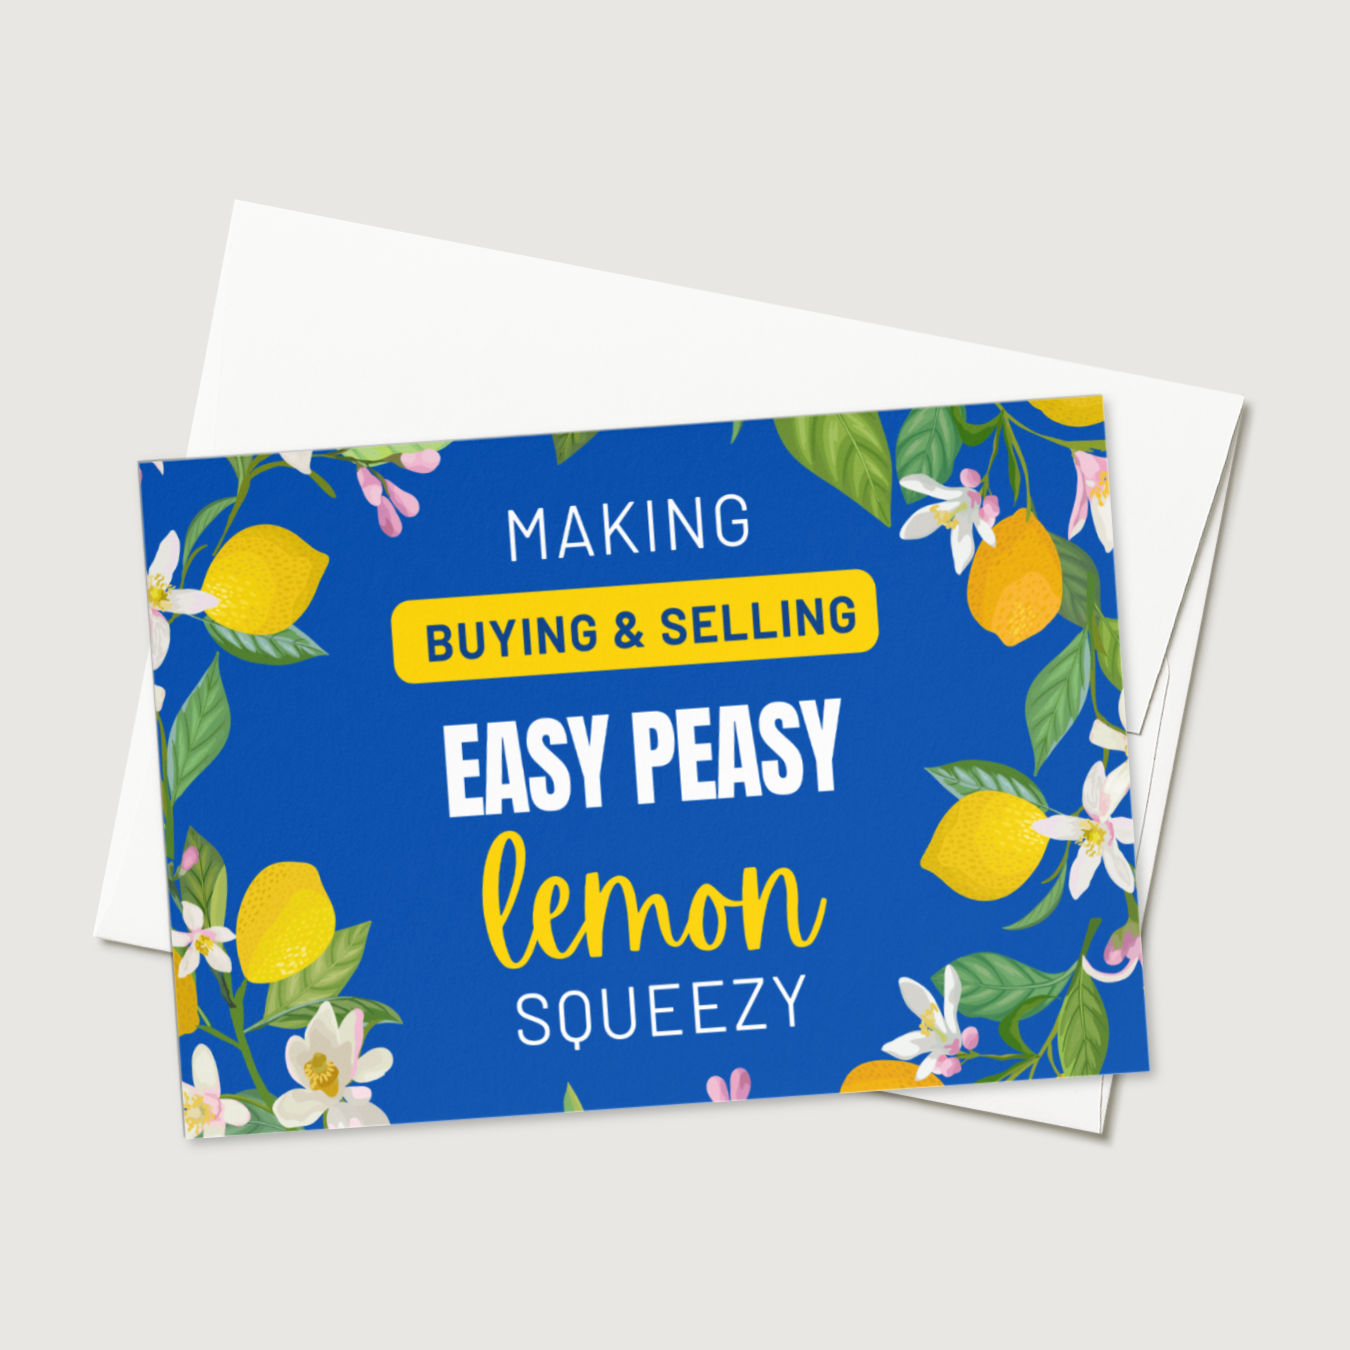 Making Buying & Selling Easy Peasy Lemon Squeezy - Set of Postcards